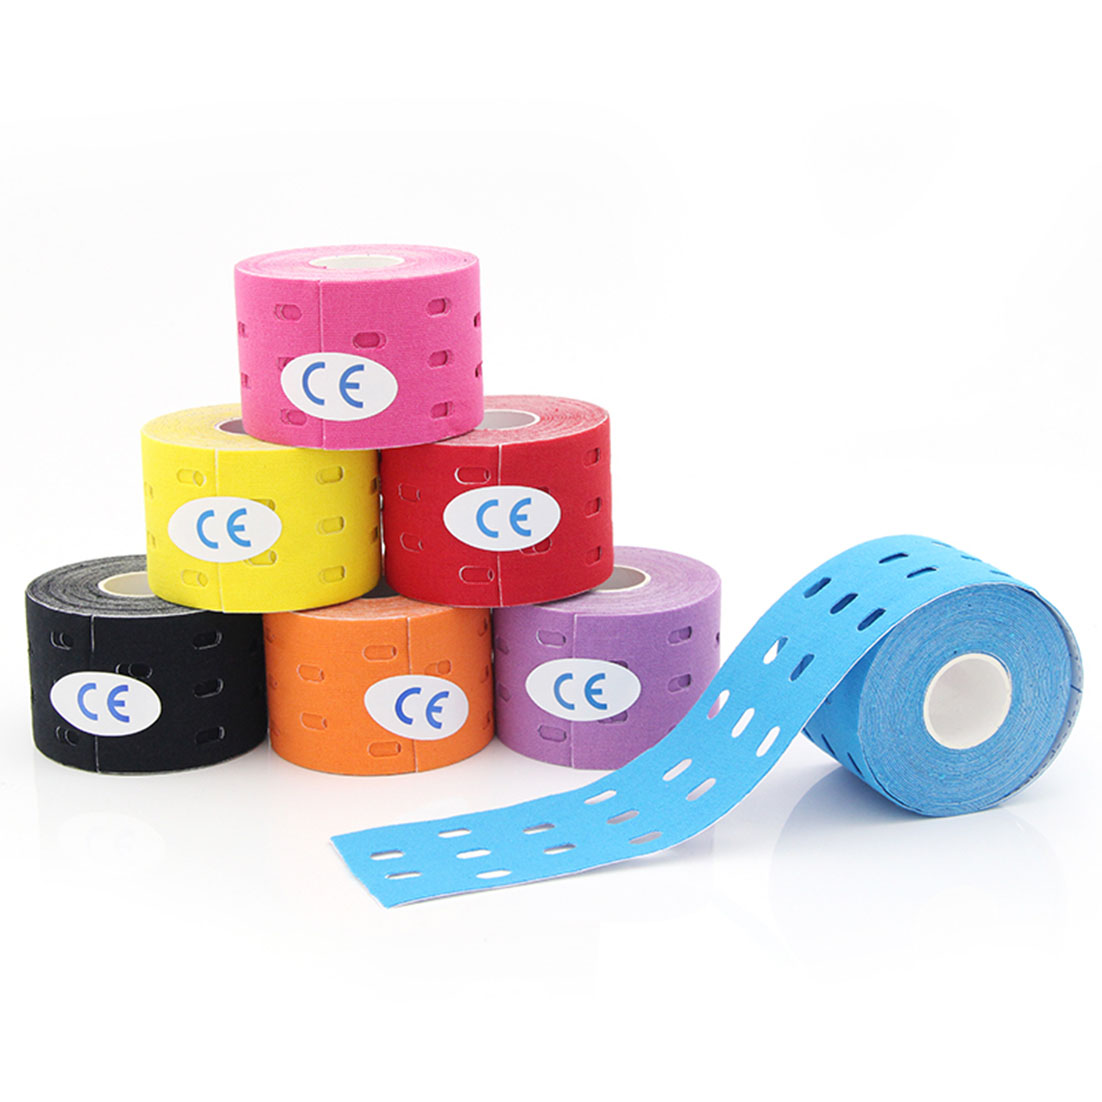 Kinesio Tape, The Magic Plaster For Athletes